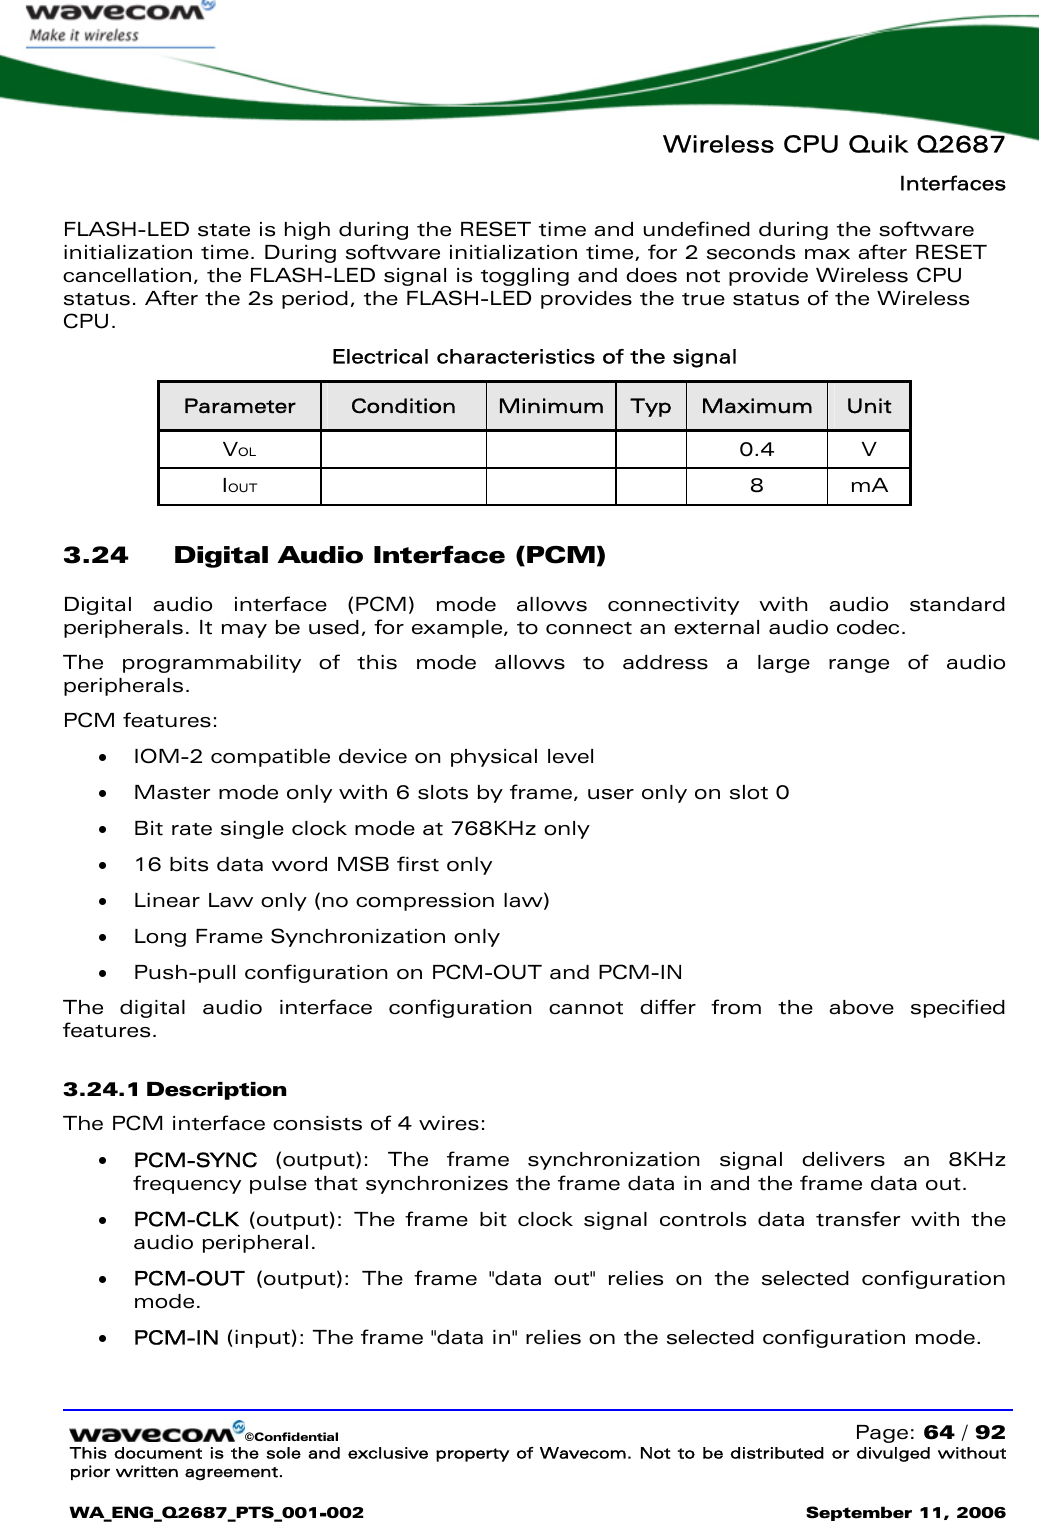   Wireless CPU Quik Q2687 Interfaces   ©Confidential   Page: 64 / 92 This document is the sole and exclusive property of Wavecom. Not to be distributed or divulged without prior written agreement.  WA_ENG_Q2687_PTS_001-002 September 11, 2006   FLASH-LED state is high during the RESET time and undefined during the software initialization time. During software initialization time, for 2 seconds max after RESET cancellation, the FLASH-LED signal is toggling and does not provide Wireless CPU status. After the 2s period, the FLASH-LED provides the true status of the Wireless CPU. Electrical characteristics of the signal Parameter  Condition  Minimum  Typ  Maximum  Unit VOL    0.4 V IOUT    8 mA 3.24 Digital Audio Interface (PCM) Digital audio interface (PCM) mode allows connectivity with audio standard peripherals. It may be used, for example, to connect an external audio codec. The programmability of this mode allows to address a large range of audio peripherals. PCM features: • IOM-2 compatible device on physical level • Master mode only with 6 slots by frame, user only on slot 0 • Bit rate single clock mode at 768KHz only  • 16 bits data word MSB first only • Linear Law only (no compression law) • Long Frame Synchronization only • Push-pull configuration on PCM-OUT and PCM-IN The digital audio interface configuration cannot differ from the above specified features. 3.24.1 Description The PCM interface consists of 4 wires: • PCM-SYNC (output): The frame synchronization signal delivers an 8KHz frequency pulse that synchronizes the frame data in and the frame data out.  • PCM-CLK (output): The frame bit clock signal controls data transfer with the audio peripheral. • PCM-OUT (output): The frame &quot;data out&quot; relies on the selected configuration mode. • PCM-IN (input): The frame &quot;data in&quot; relies on the selected configuration mode.  